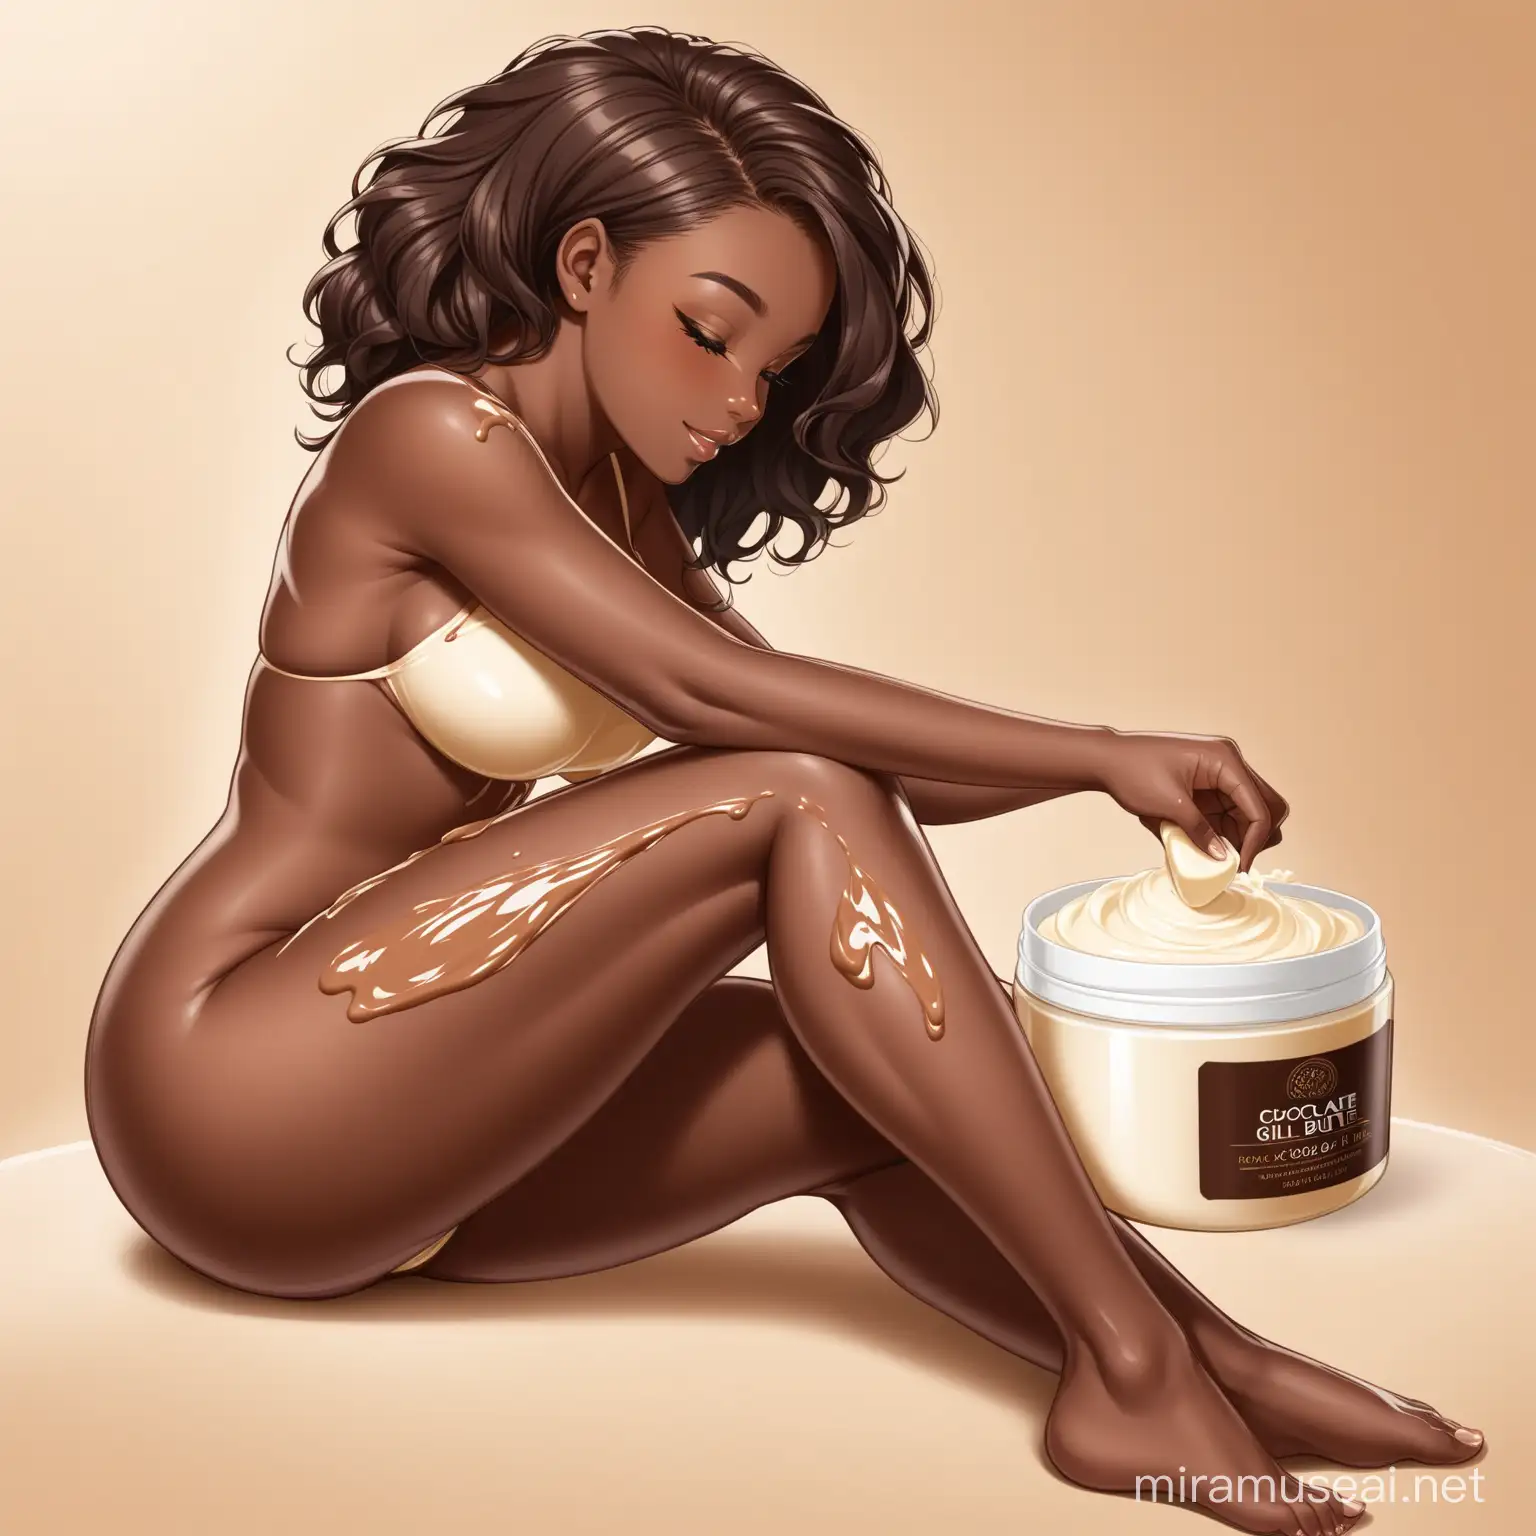 Young Woman with Chocolate Skin Applying Body Butter to Legs